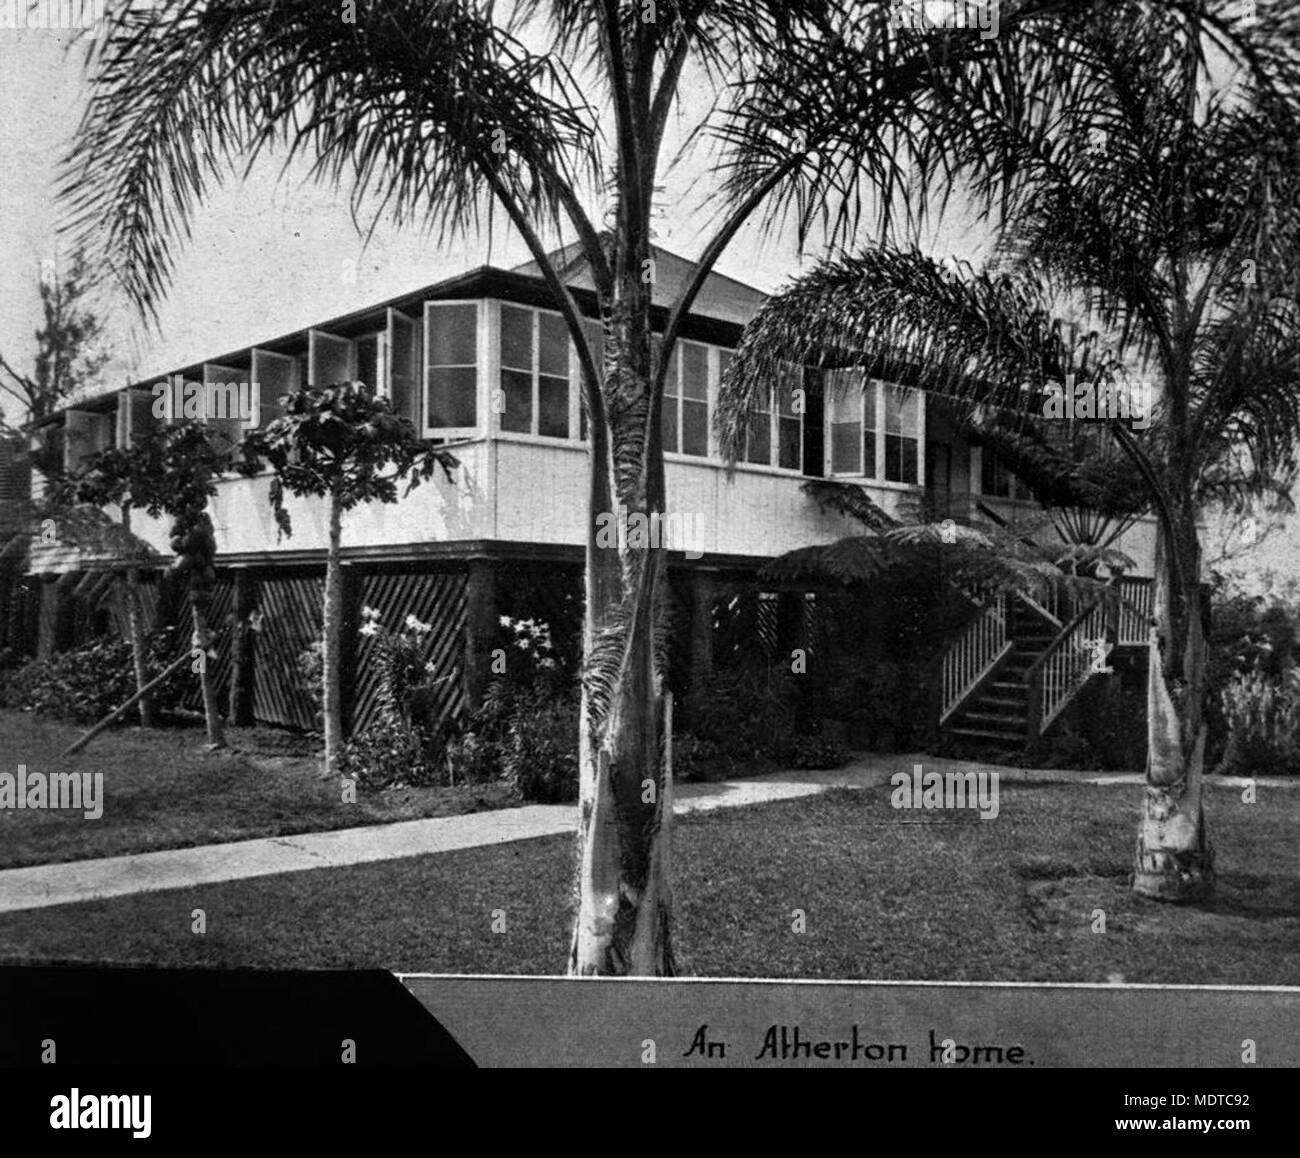 Queenslander home set in a tropical garden at Atherton, Queensland,. Location: Atherton, Queensland    Description: This highset house in Atherton has enclosed verandahs, approached from the front by divided stairs. The windows on the verandah are open to catch the cool breezes.  Atherton was named after John Atherton, the pioneer pastoralist, who brought cattle into the district from Rockhampton in 1877. He took up Emerald End Station on the banks of the Barron River. Settlement in Atherton began with the development of a cedar logging camp known as Prior's Pocket. Atherton is the agricultura Stock Photo